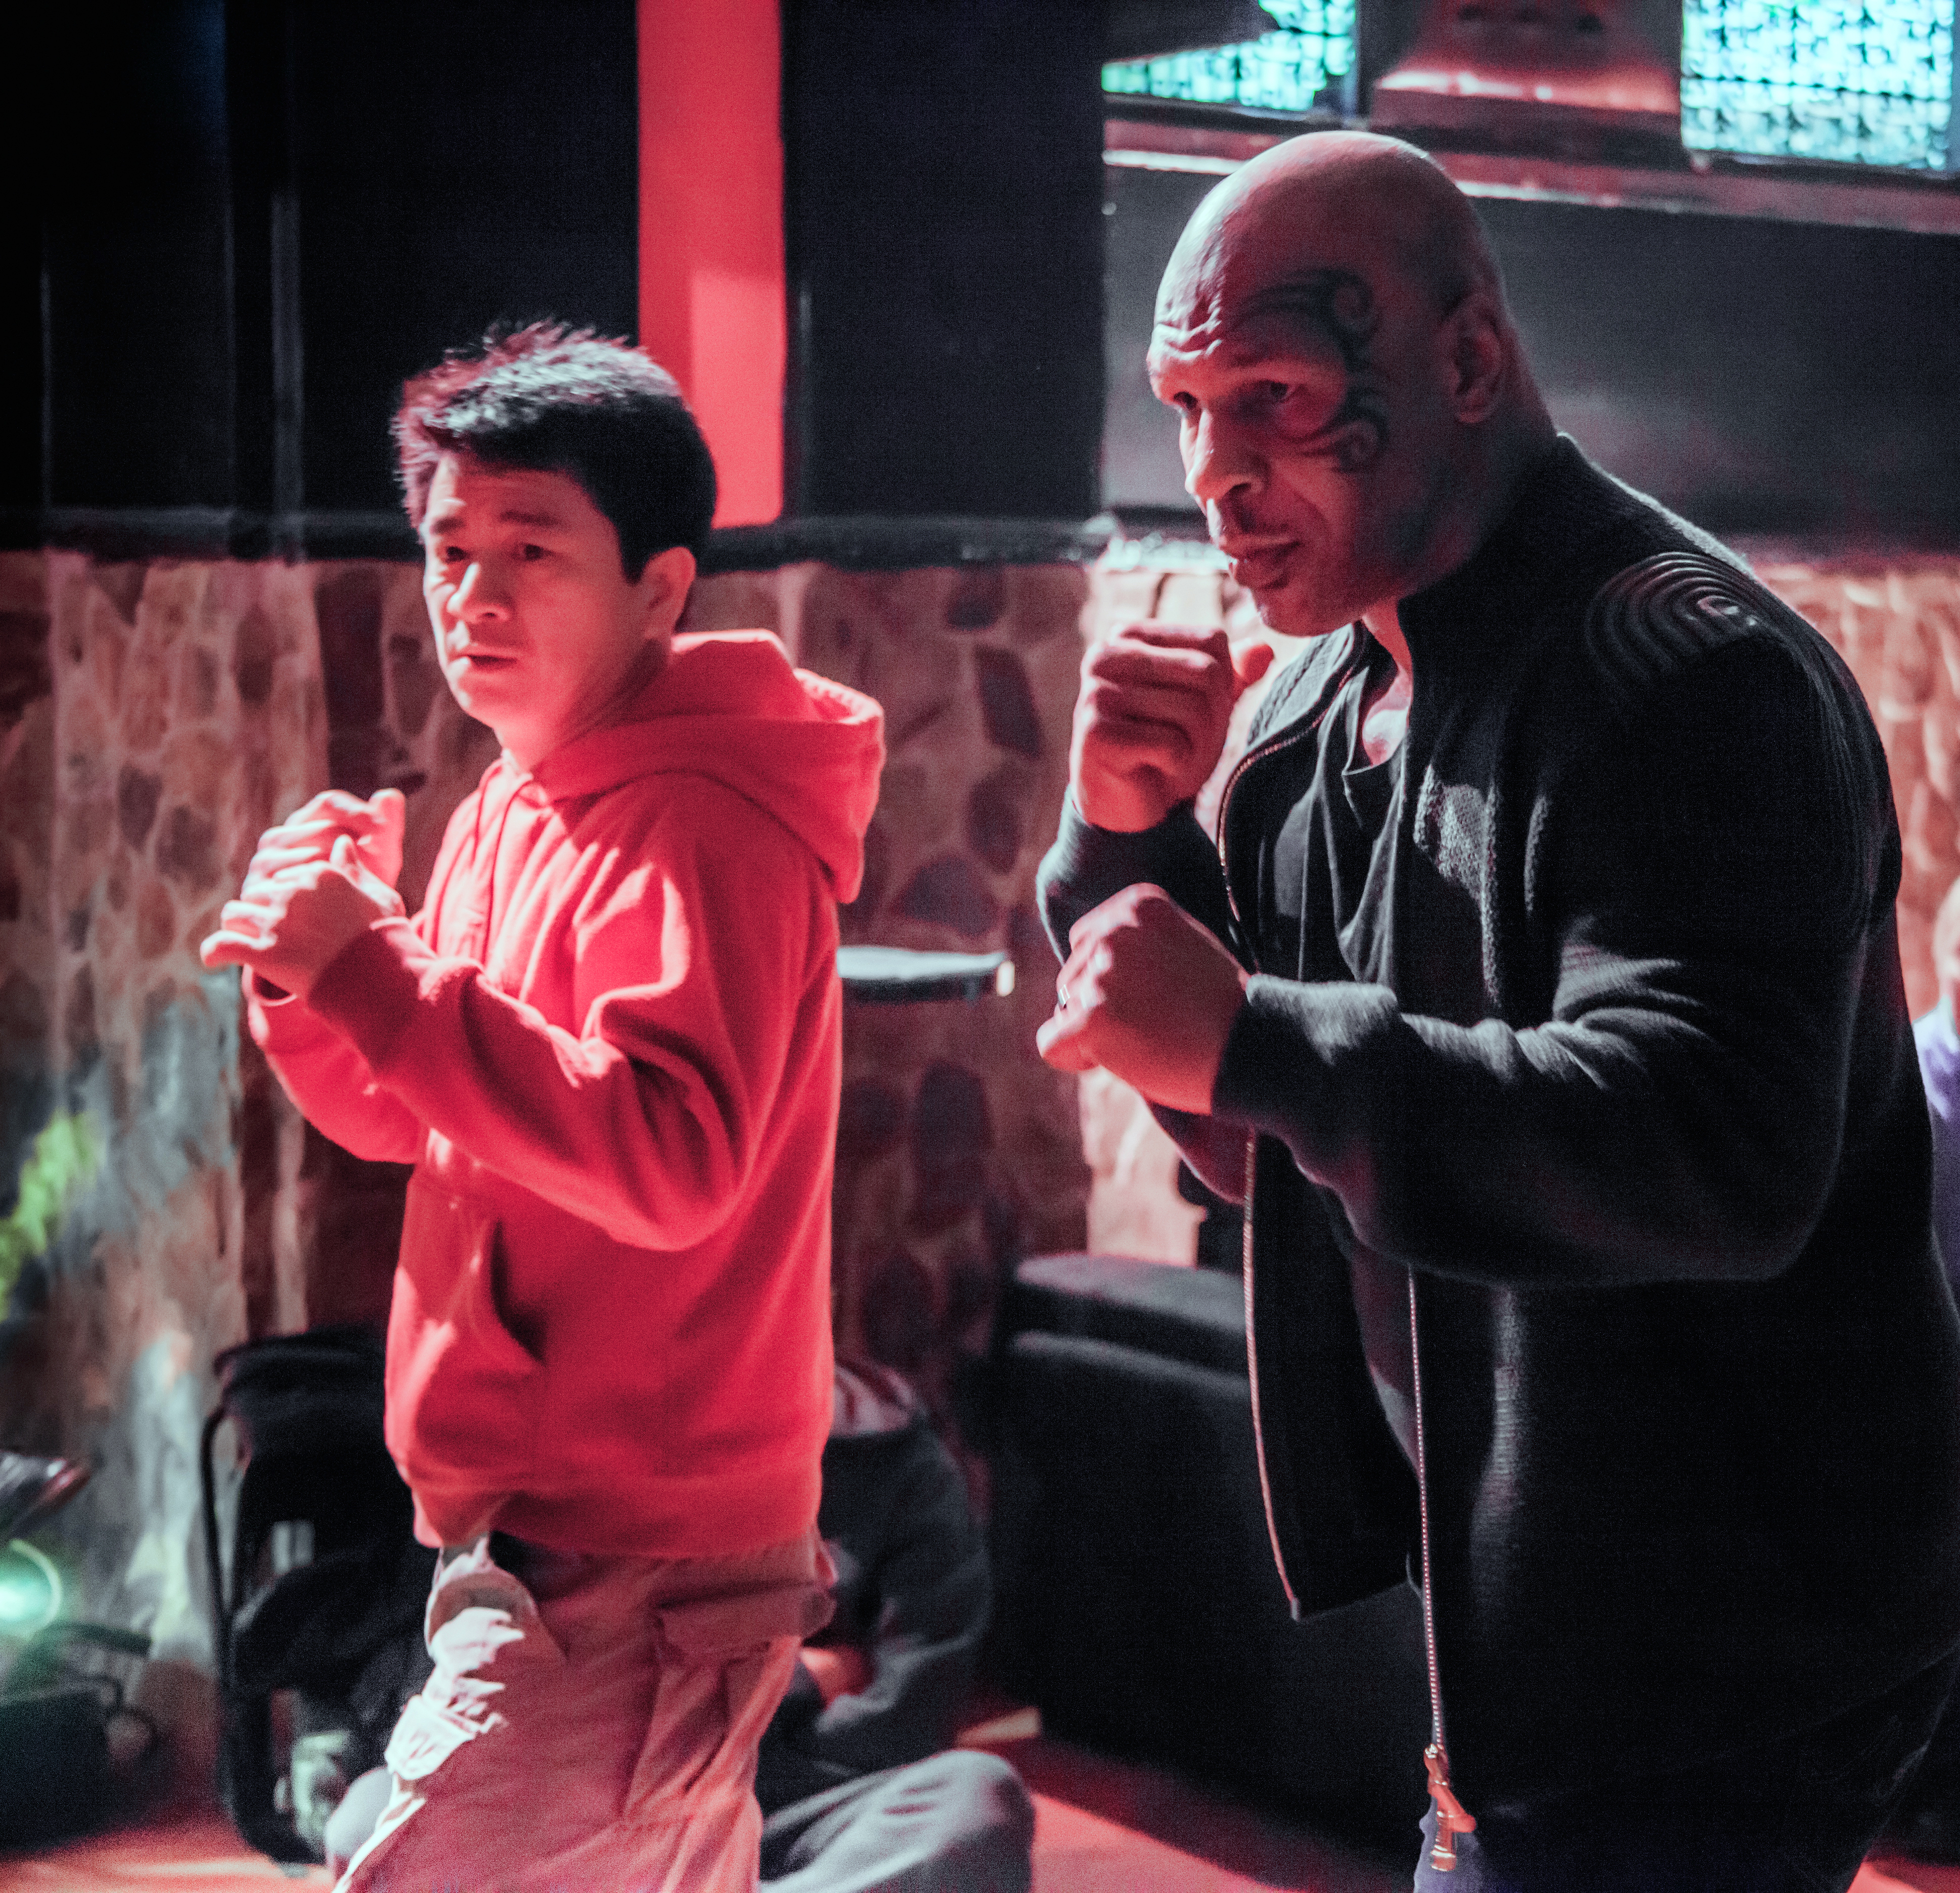 Hoang Nghi fight choreographer for Mike Tyson in 